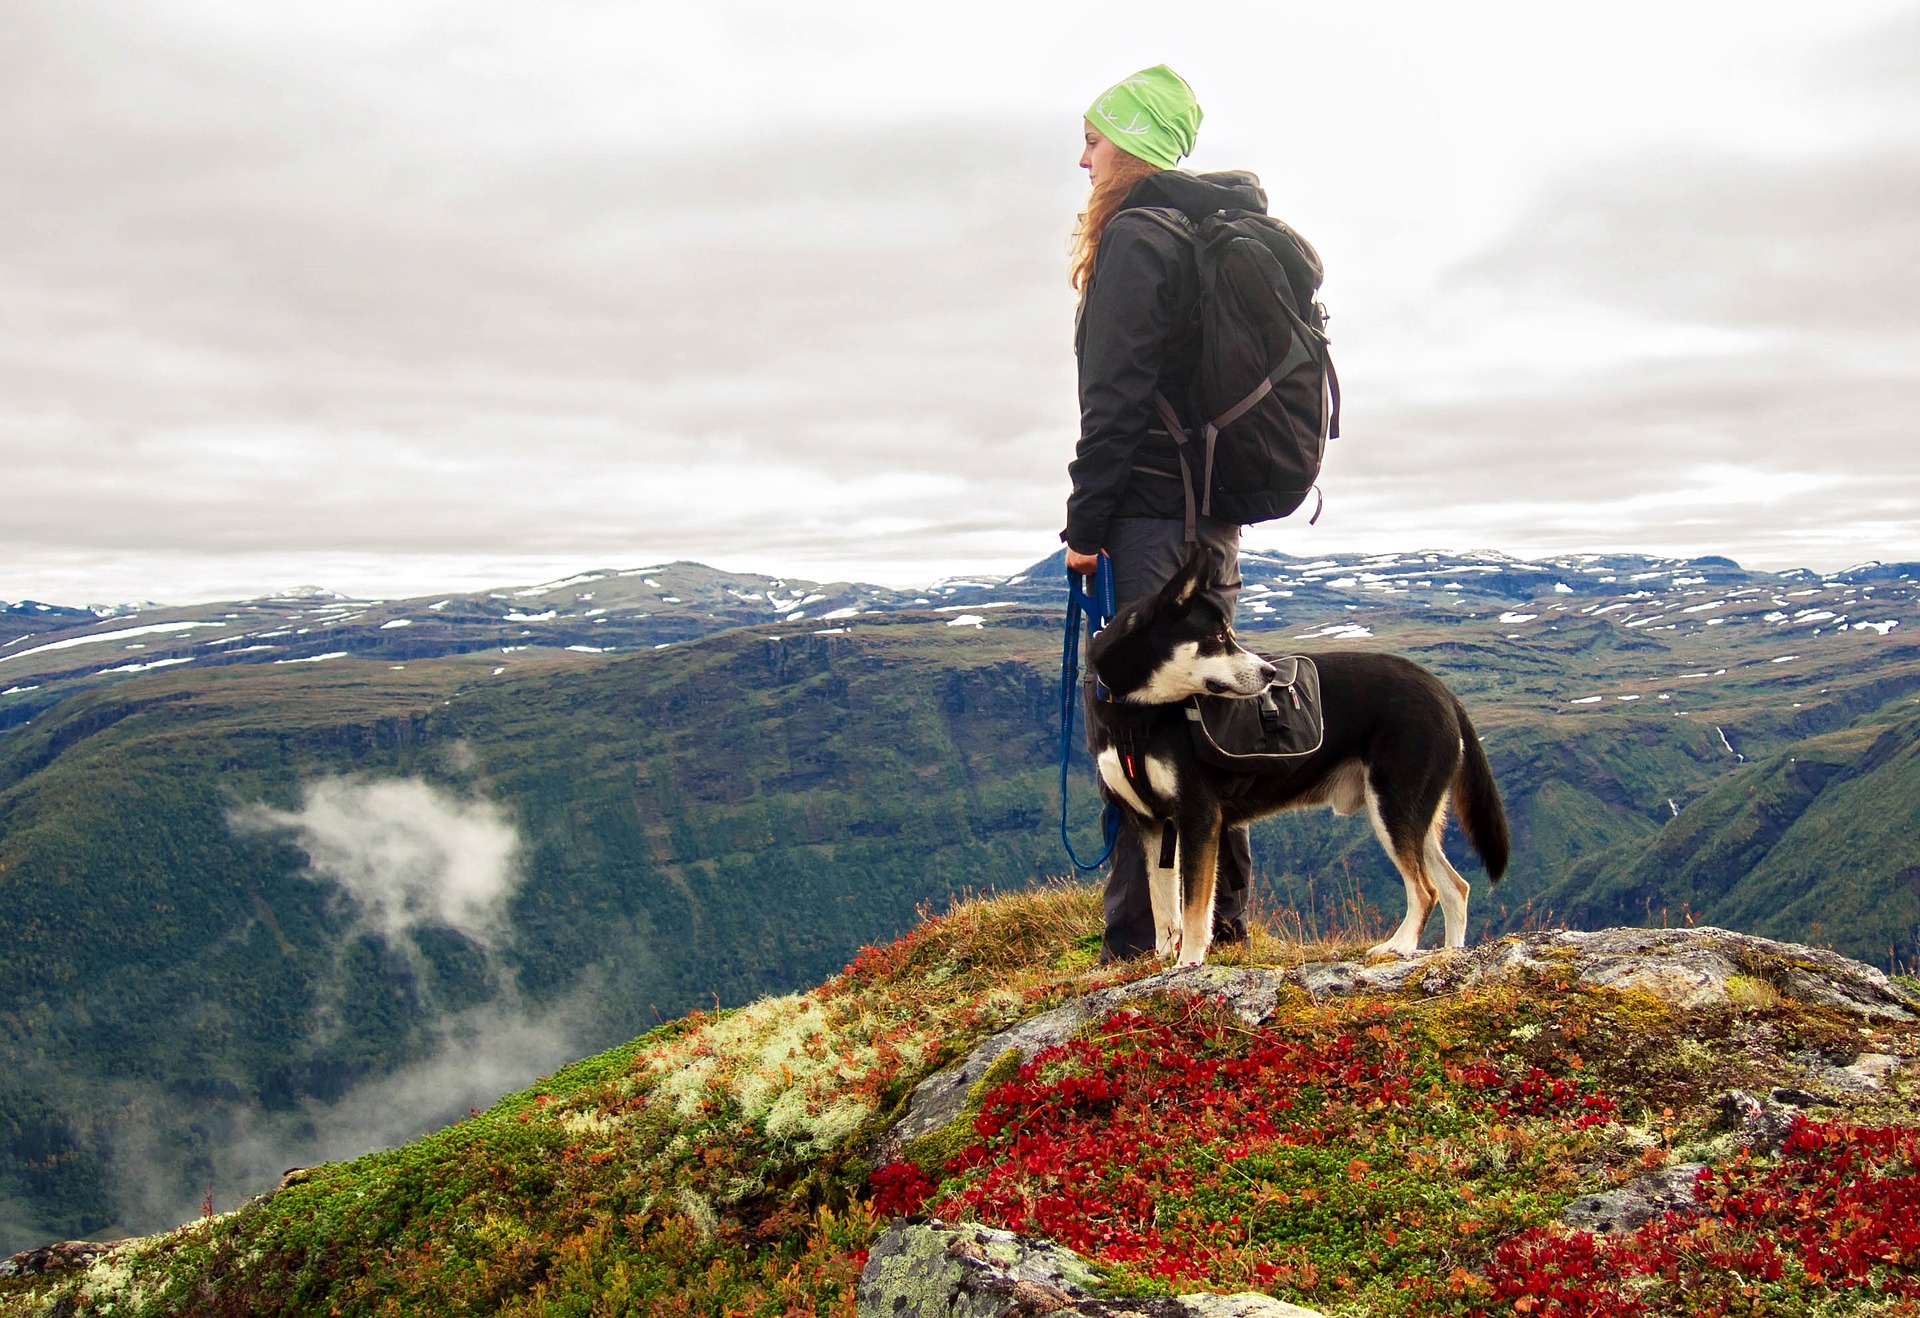 animal dental care and oral surgery - dog and owner standing on a mountain top after a hike